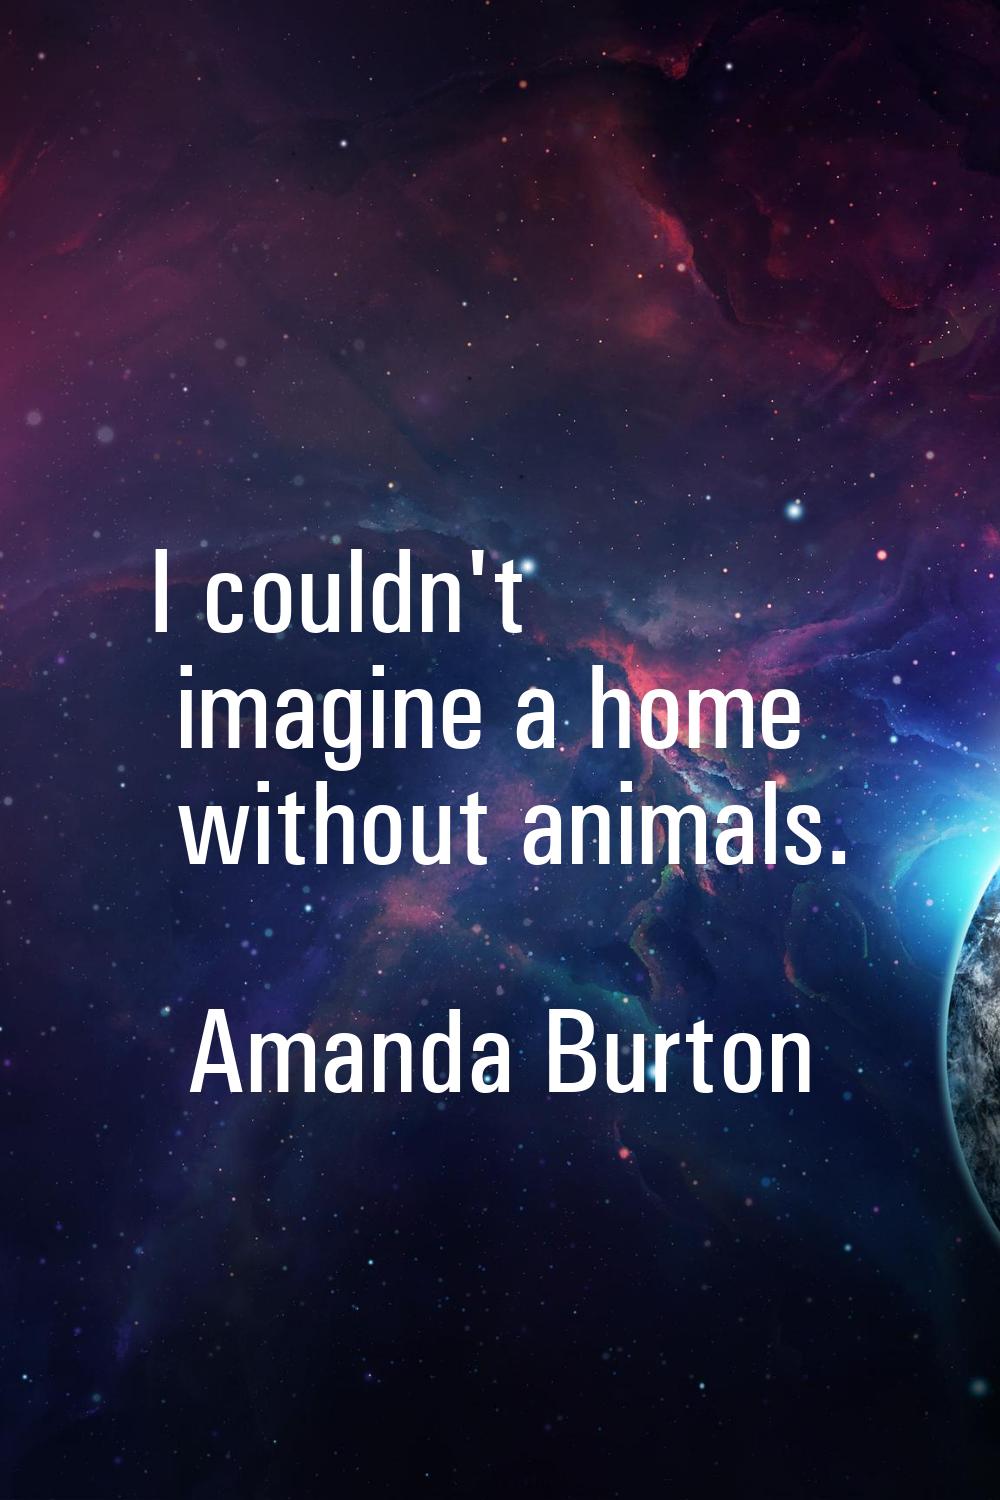 I couldn't imagine a home without animals.